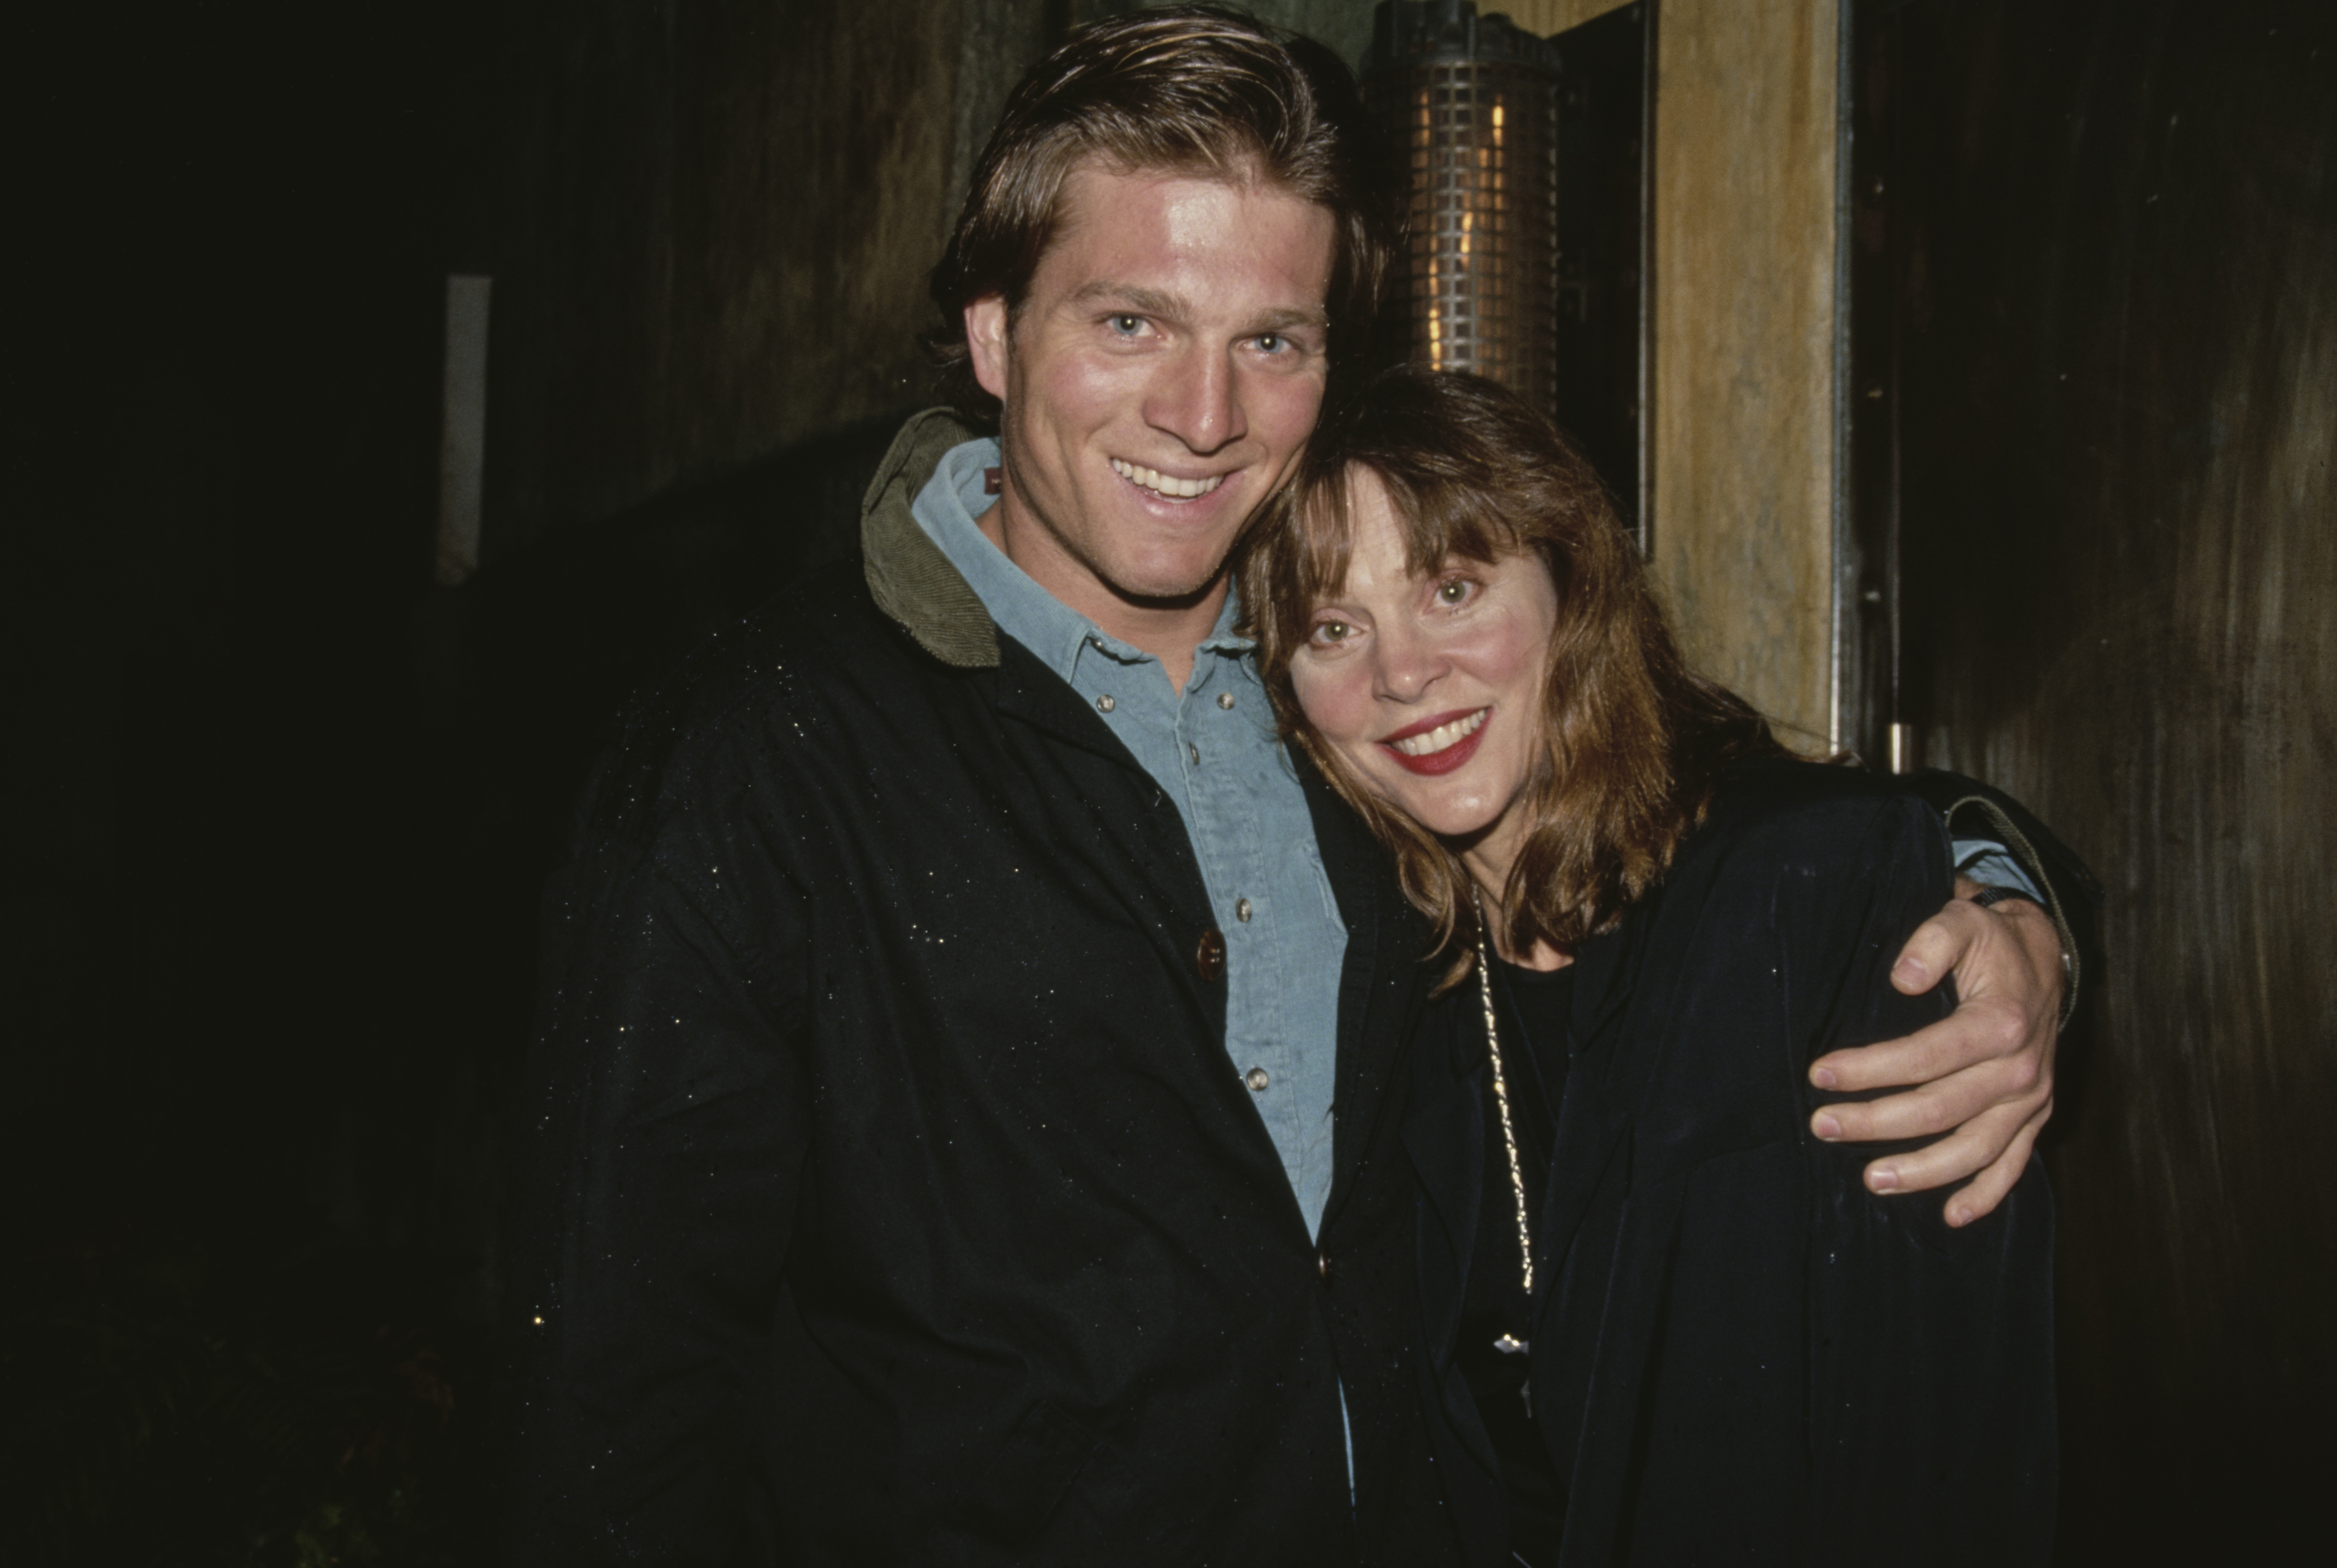 Leigh Taylor-Young and Patrick O'Neal photographed in 1990 | Source: Getty Images